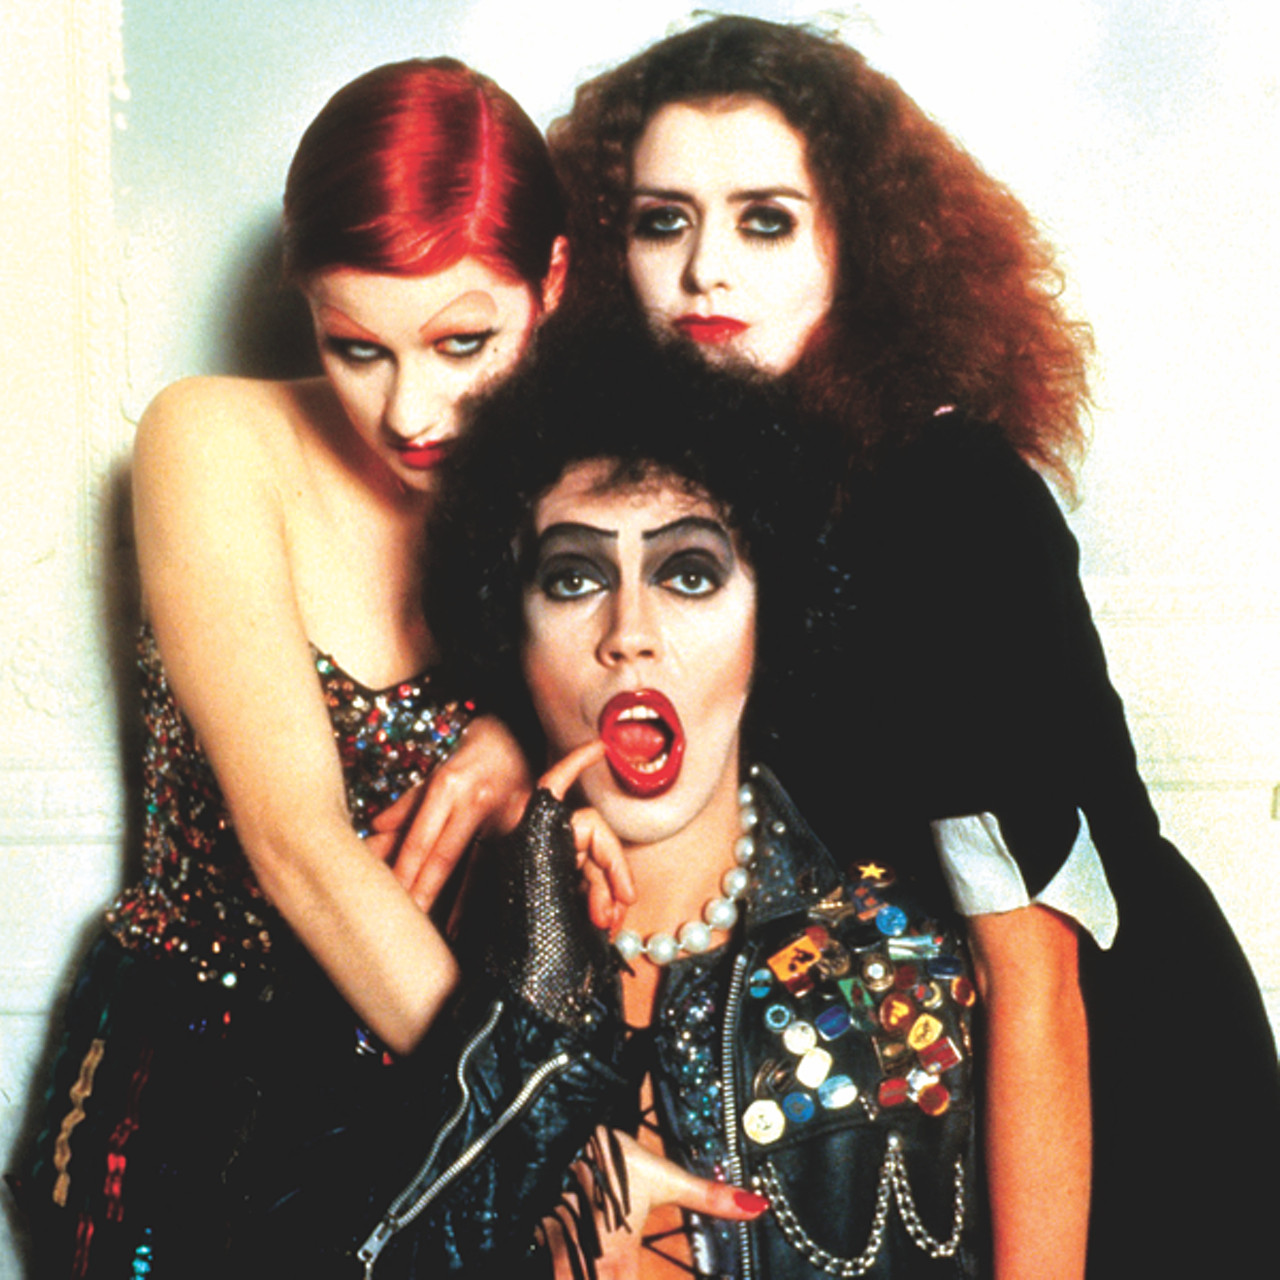 Make your mom uncomfortable and take her to Rocky Horror Picture Show
Thursday, November 28, 10pm, Fitzgeralds, 437 McCarty Road #101, (210) 607-7007, fitzrockssa.com
It might actually be hilarious to take your family to this just so they can feel awkward as hell. Sexy, weird and hilarious, Rocky Horror Picture Show is a cult movie classic that’s been adapted for an interactive stage show. This will definitely create some lasting holiday memories.
Courtesy photo